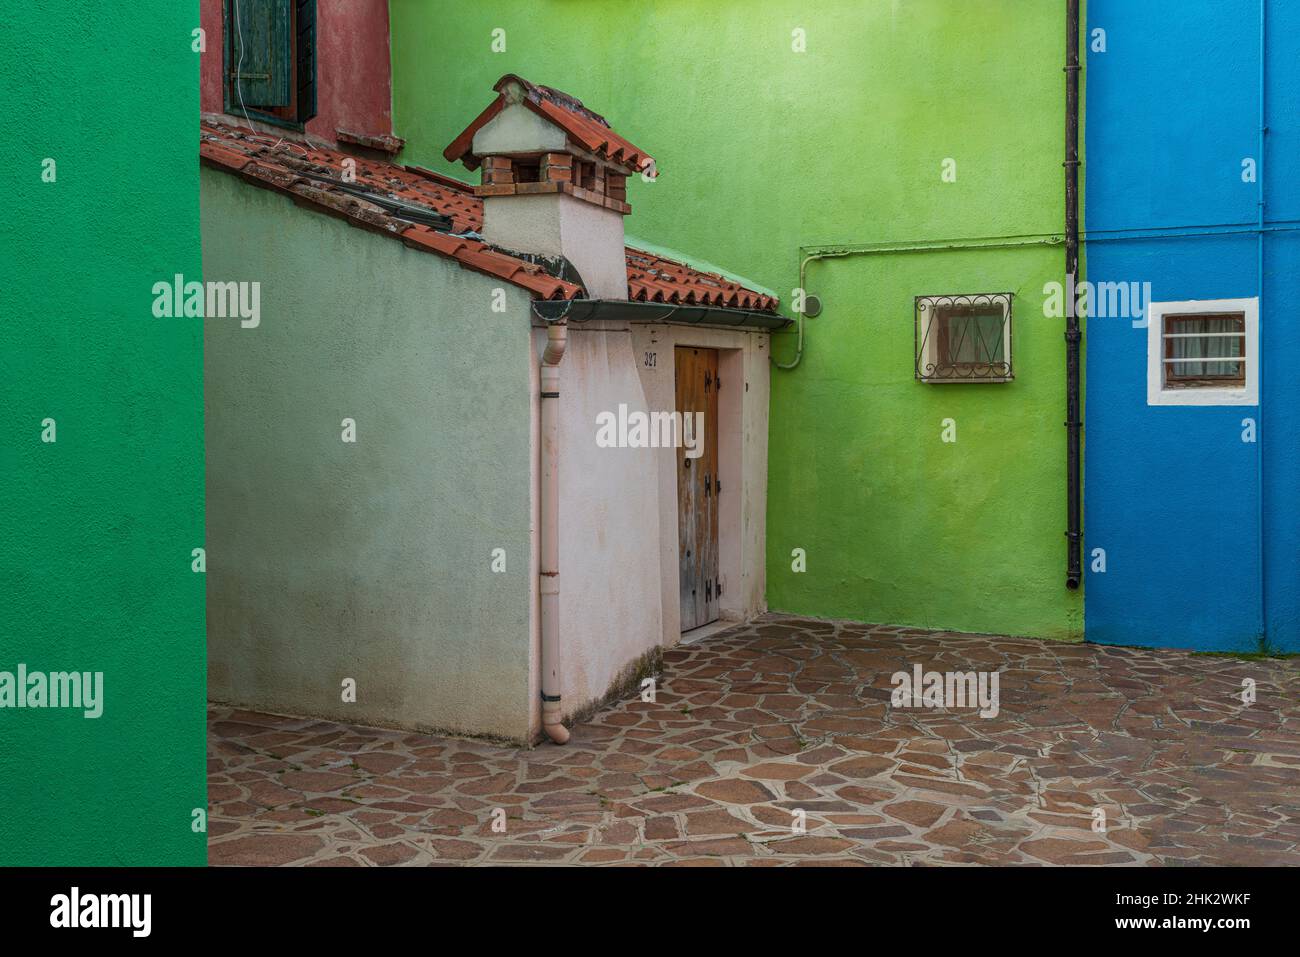 Europe, Italy, Venice. Colorful house exteriors in Burano. Stock Photo